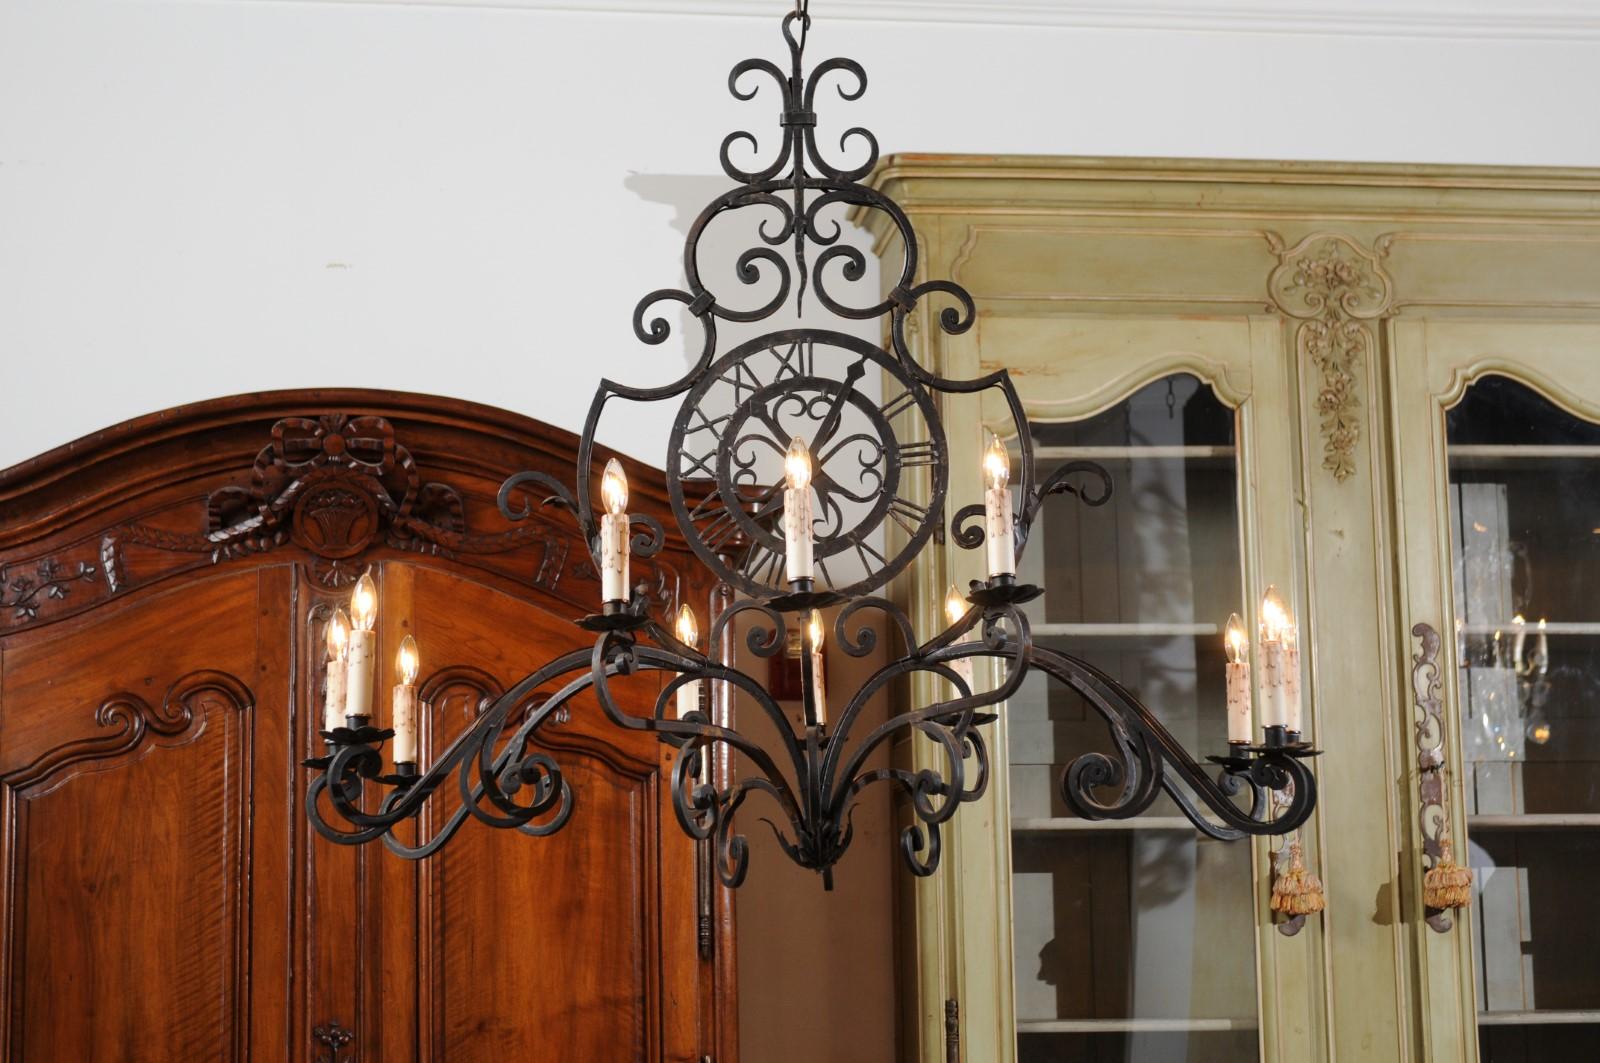 French 12-Light Wrought-Iron Chandelier with Clock Motif and Scrolling Armature For Sale 5